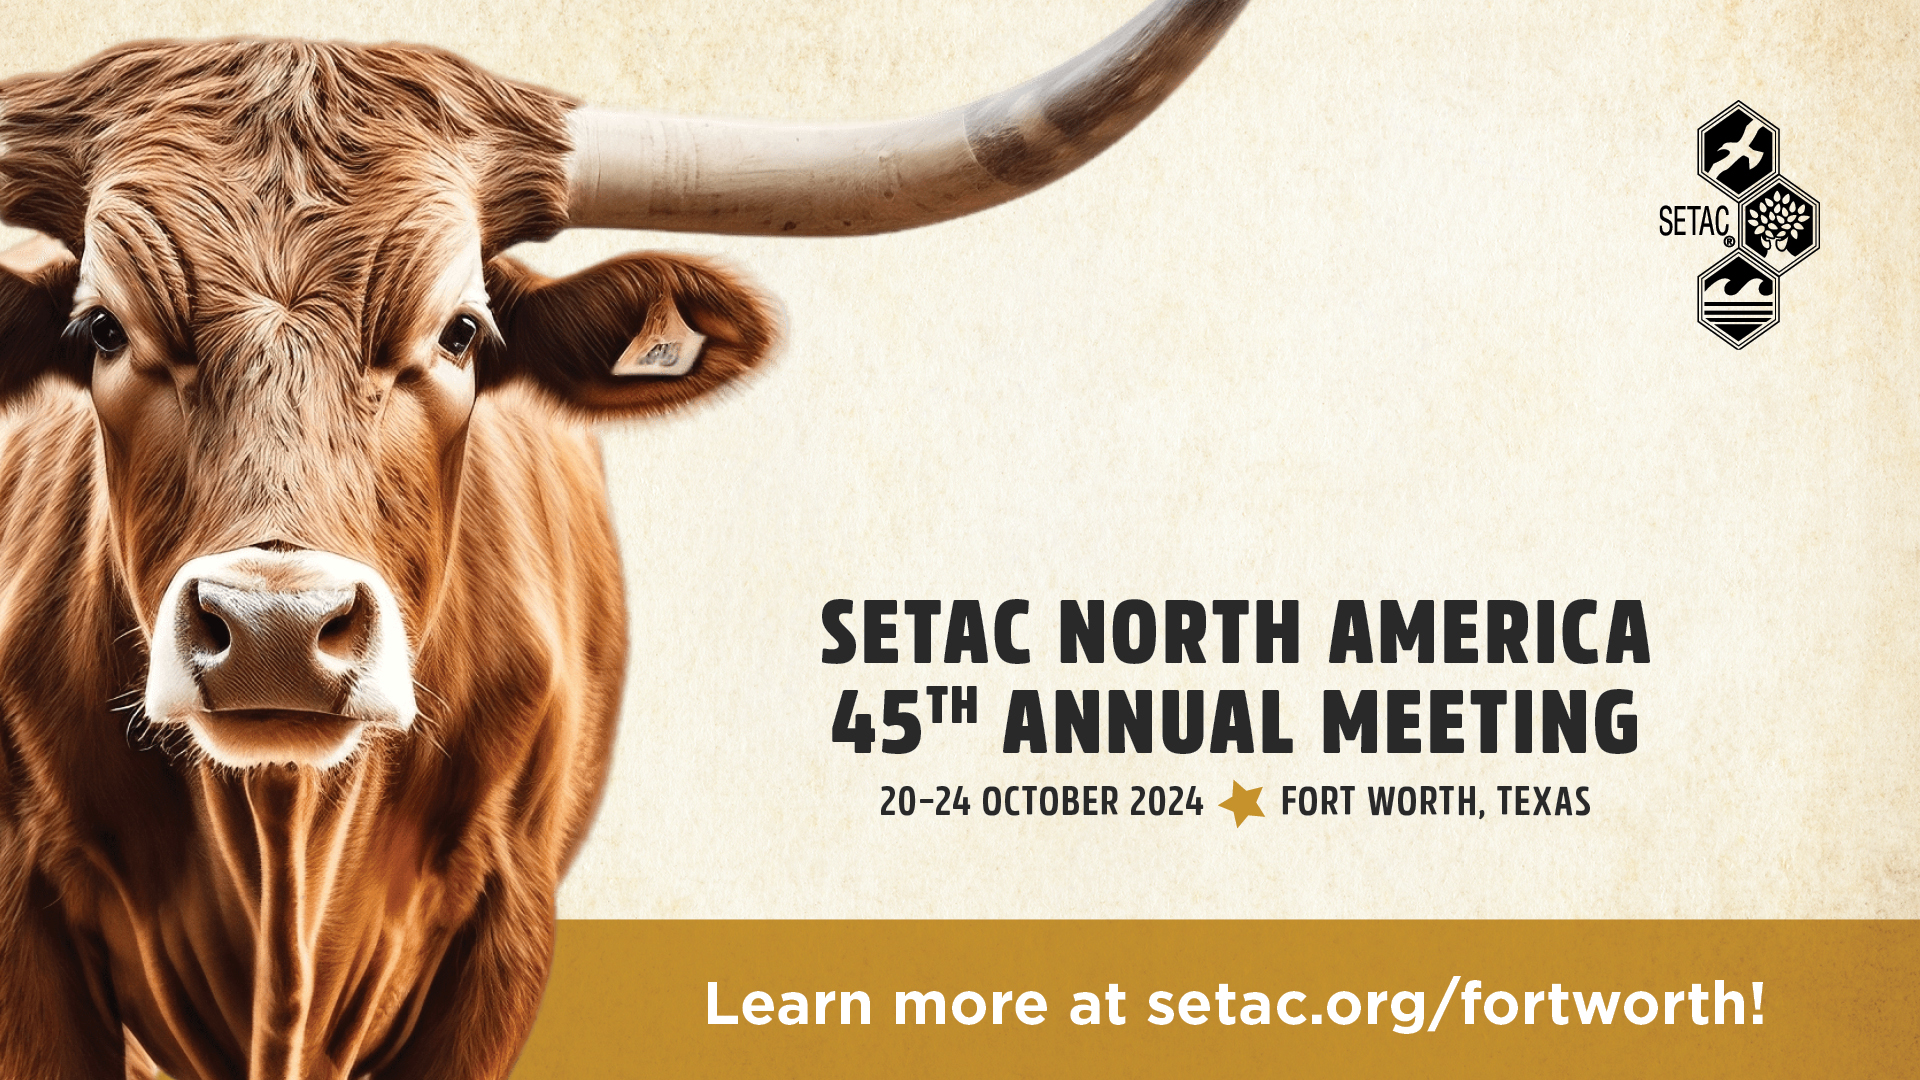 SETAC North America 45th Annual Meeting: Learn More